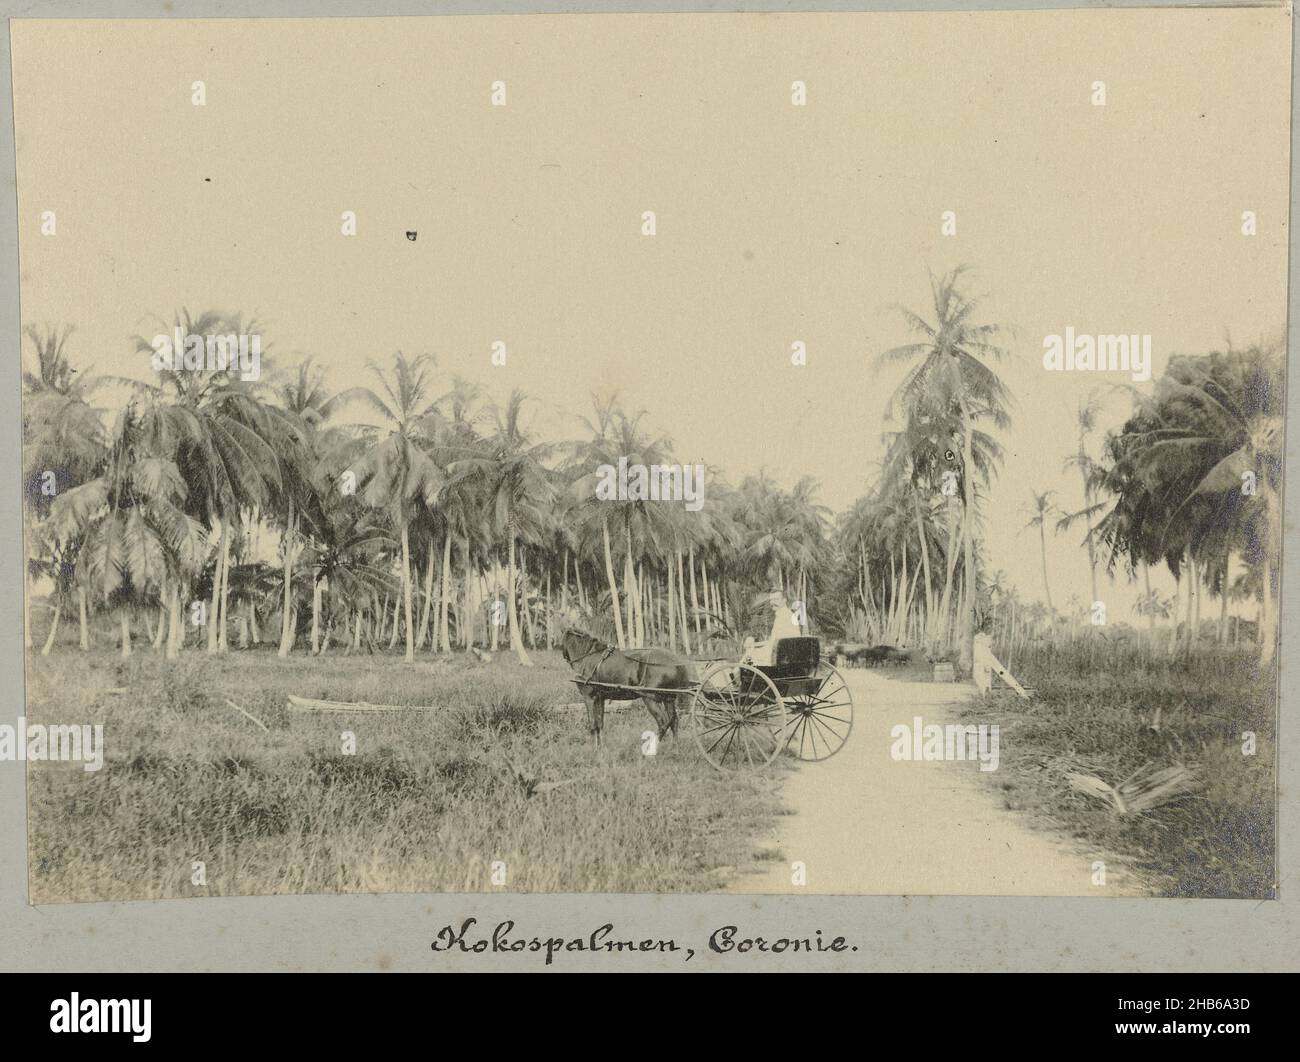 Coconut palms, Coronie (title on object), Coconut palms in Coronie. In the foreground is a European man sitting in a horse-drawn carriage. Part of the photo album Souvenir de Voyage (part 2), about the life of the Doijer family in and around the plantation Ma Retraite in Suriname in the years 1906-1913., Hendrik Doijer (attributed to), Suriname, 1906 - 1913, photographic support, gelatin silver print, height 118 mm × width 168 mm Stock Photo